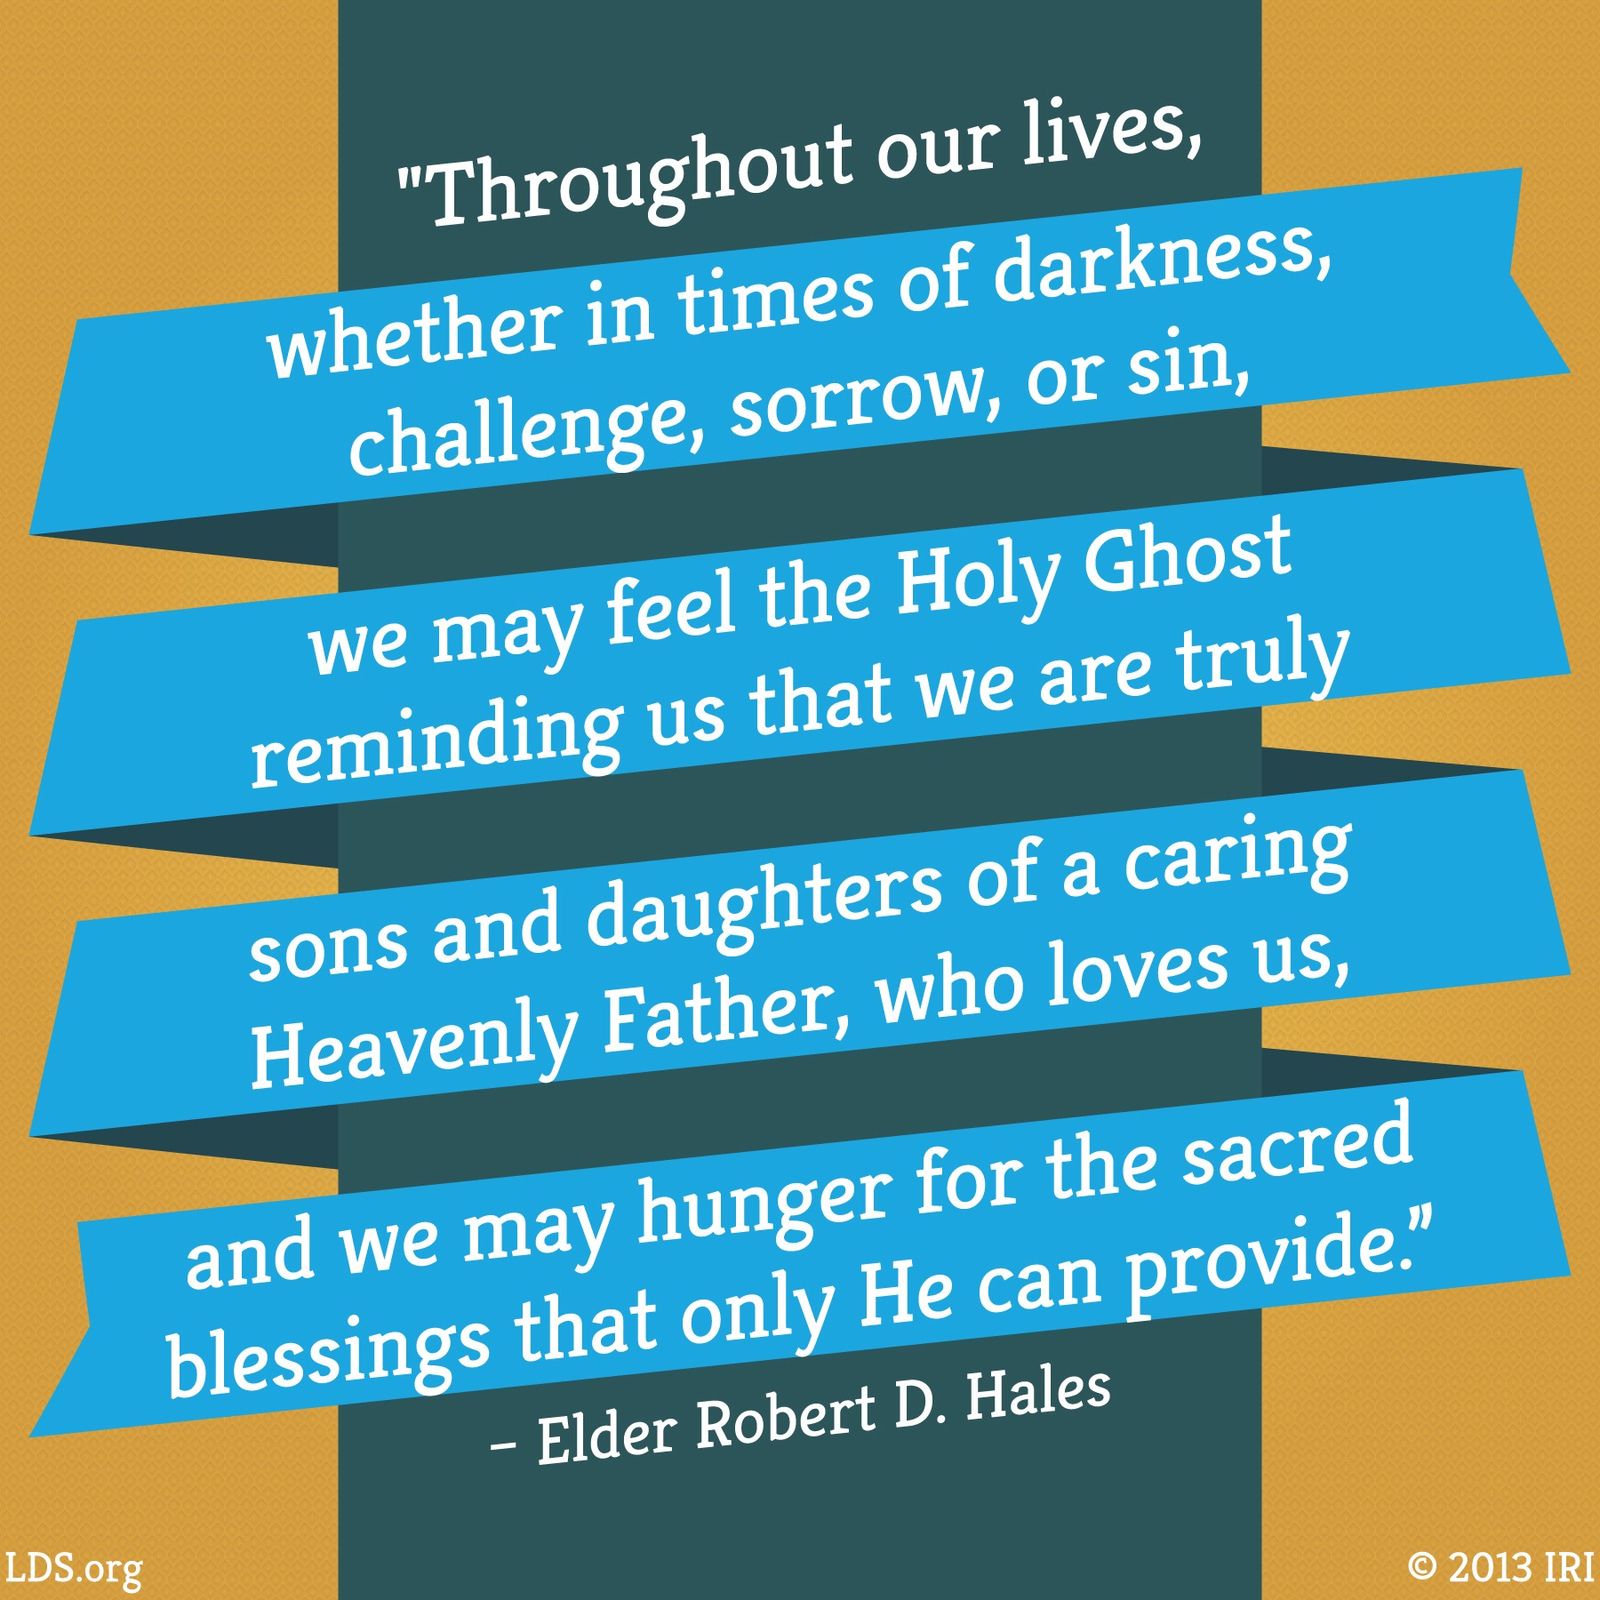 “Throughout our lives, whether in times of darkness, challenge, sorrow, or sin, we may feel the Holy Ghost reminding us that we are truly sons and daughters of a caring Heavenly Father, who loves us, and we may hunger for the sacred blessings that only He can provide.”—Elder Robert D. Hales, “Coming to Ourselves: The Sacrament, the Temple, and Sacrifice in Service”